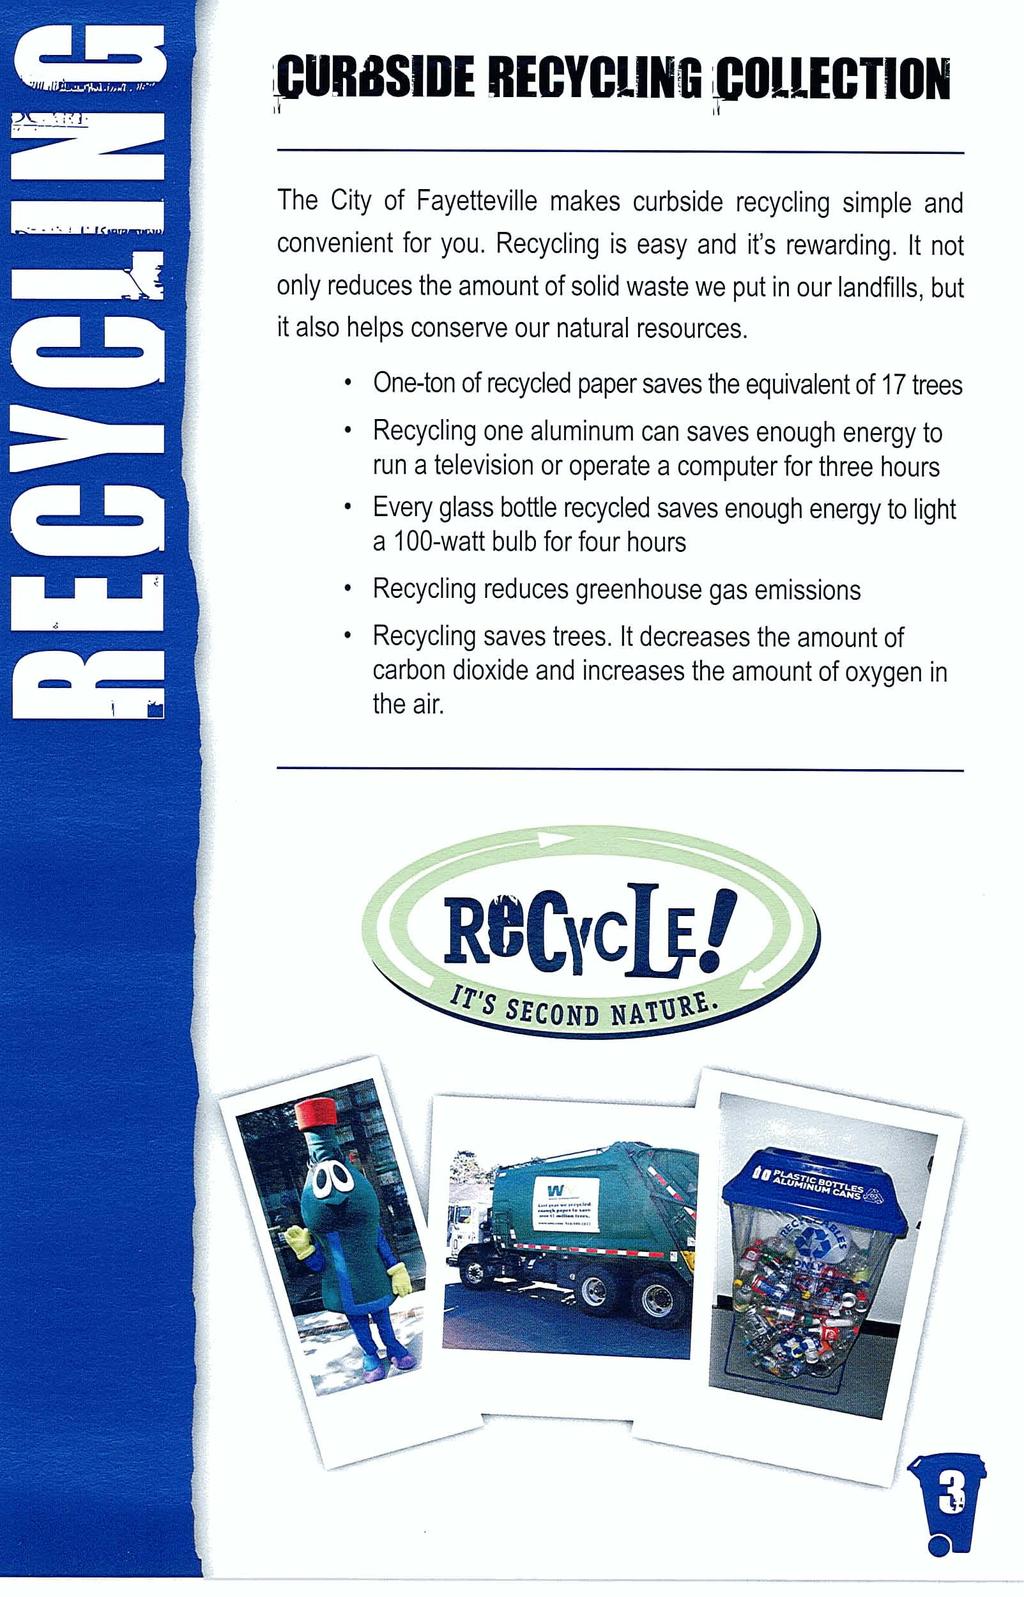 '--f cllbfis!de RECYCLING collection The City of Fayetteville makes curbside recycling simple and convenient for you. Recycling is easy and it's rewarding.